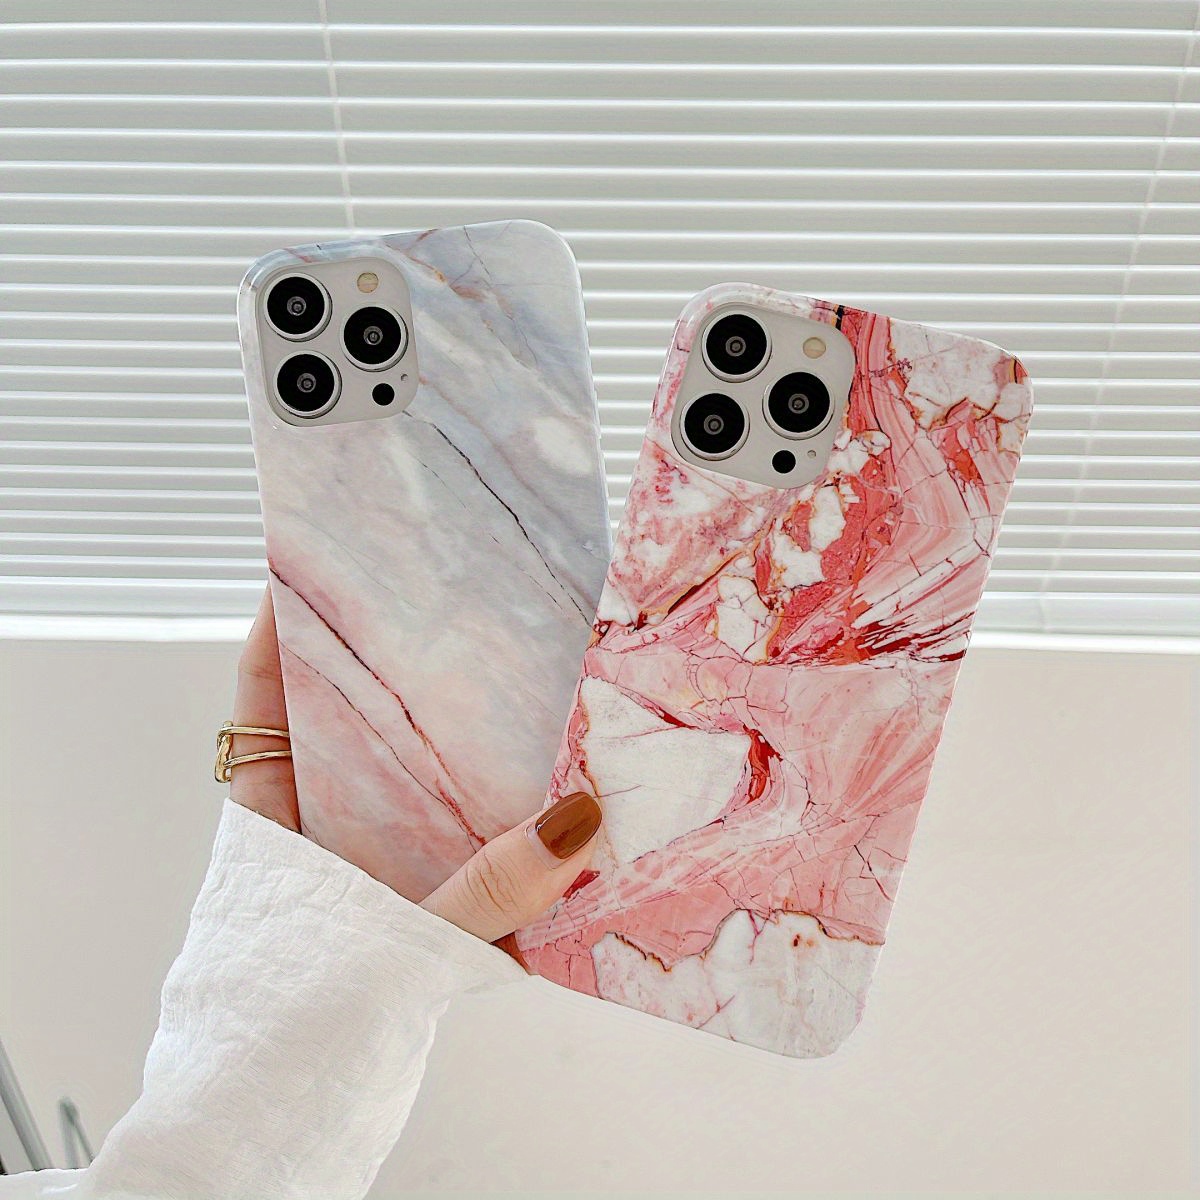 

Marble Pattern Tpu Case For Iphone 11 12 13 14 15 Pro Max, Full Coverage Shockproof Protective Cover